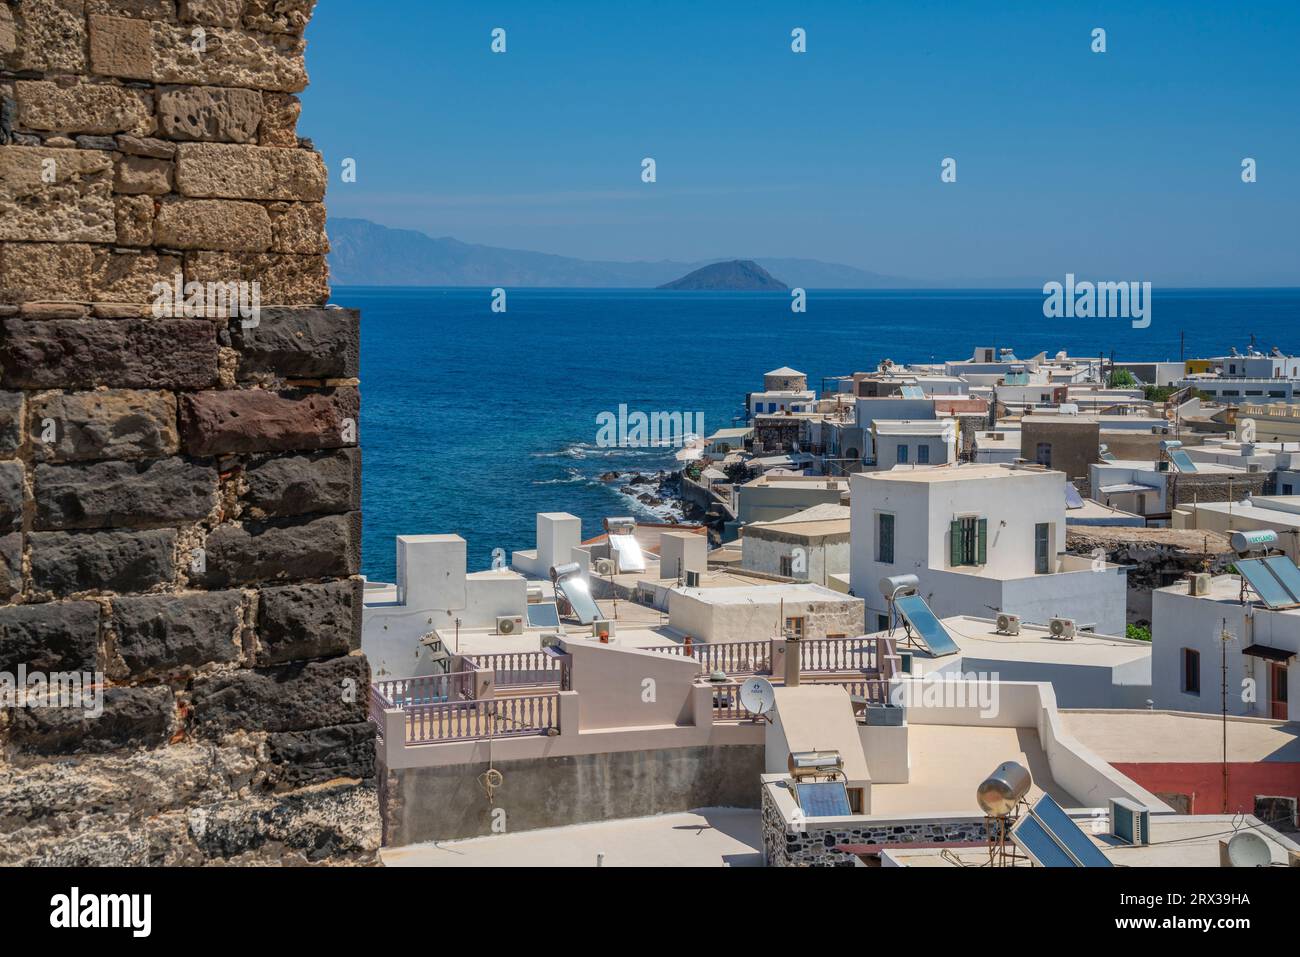 View of sea and whitewashed buildings and rooftops of Mandraki, Mandraki, Nisyros, Dodecanese, Greek Islands, Greece, Europe Stock Photo